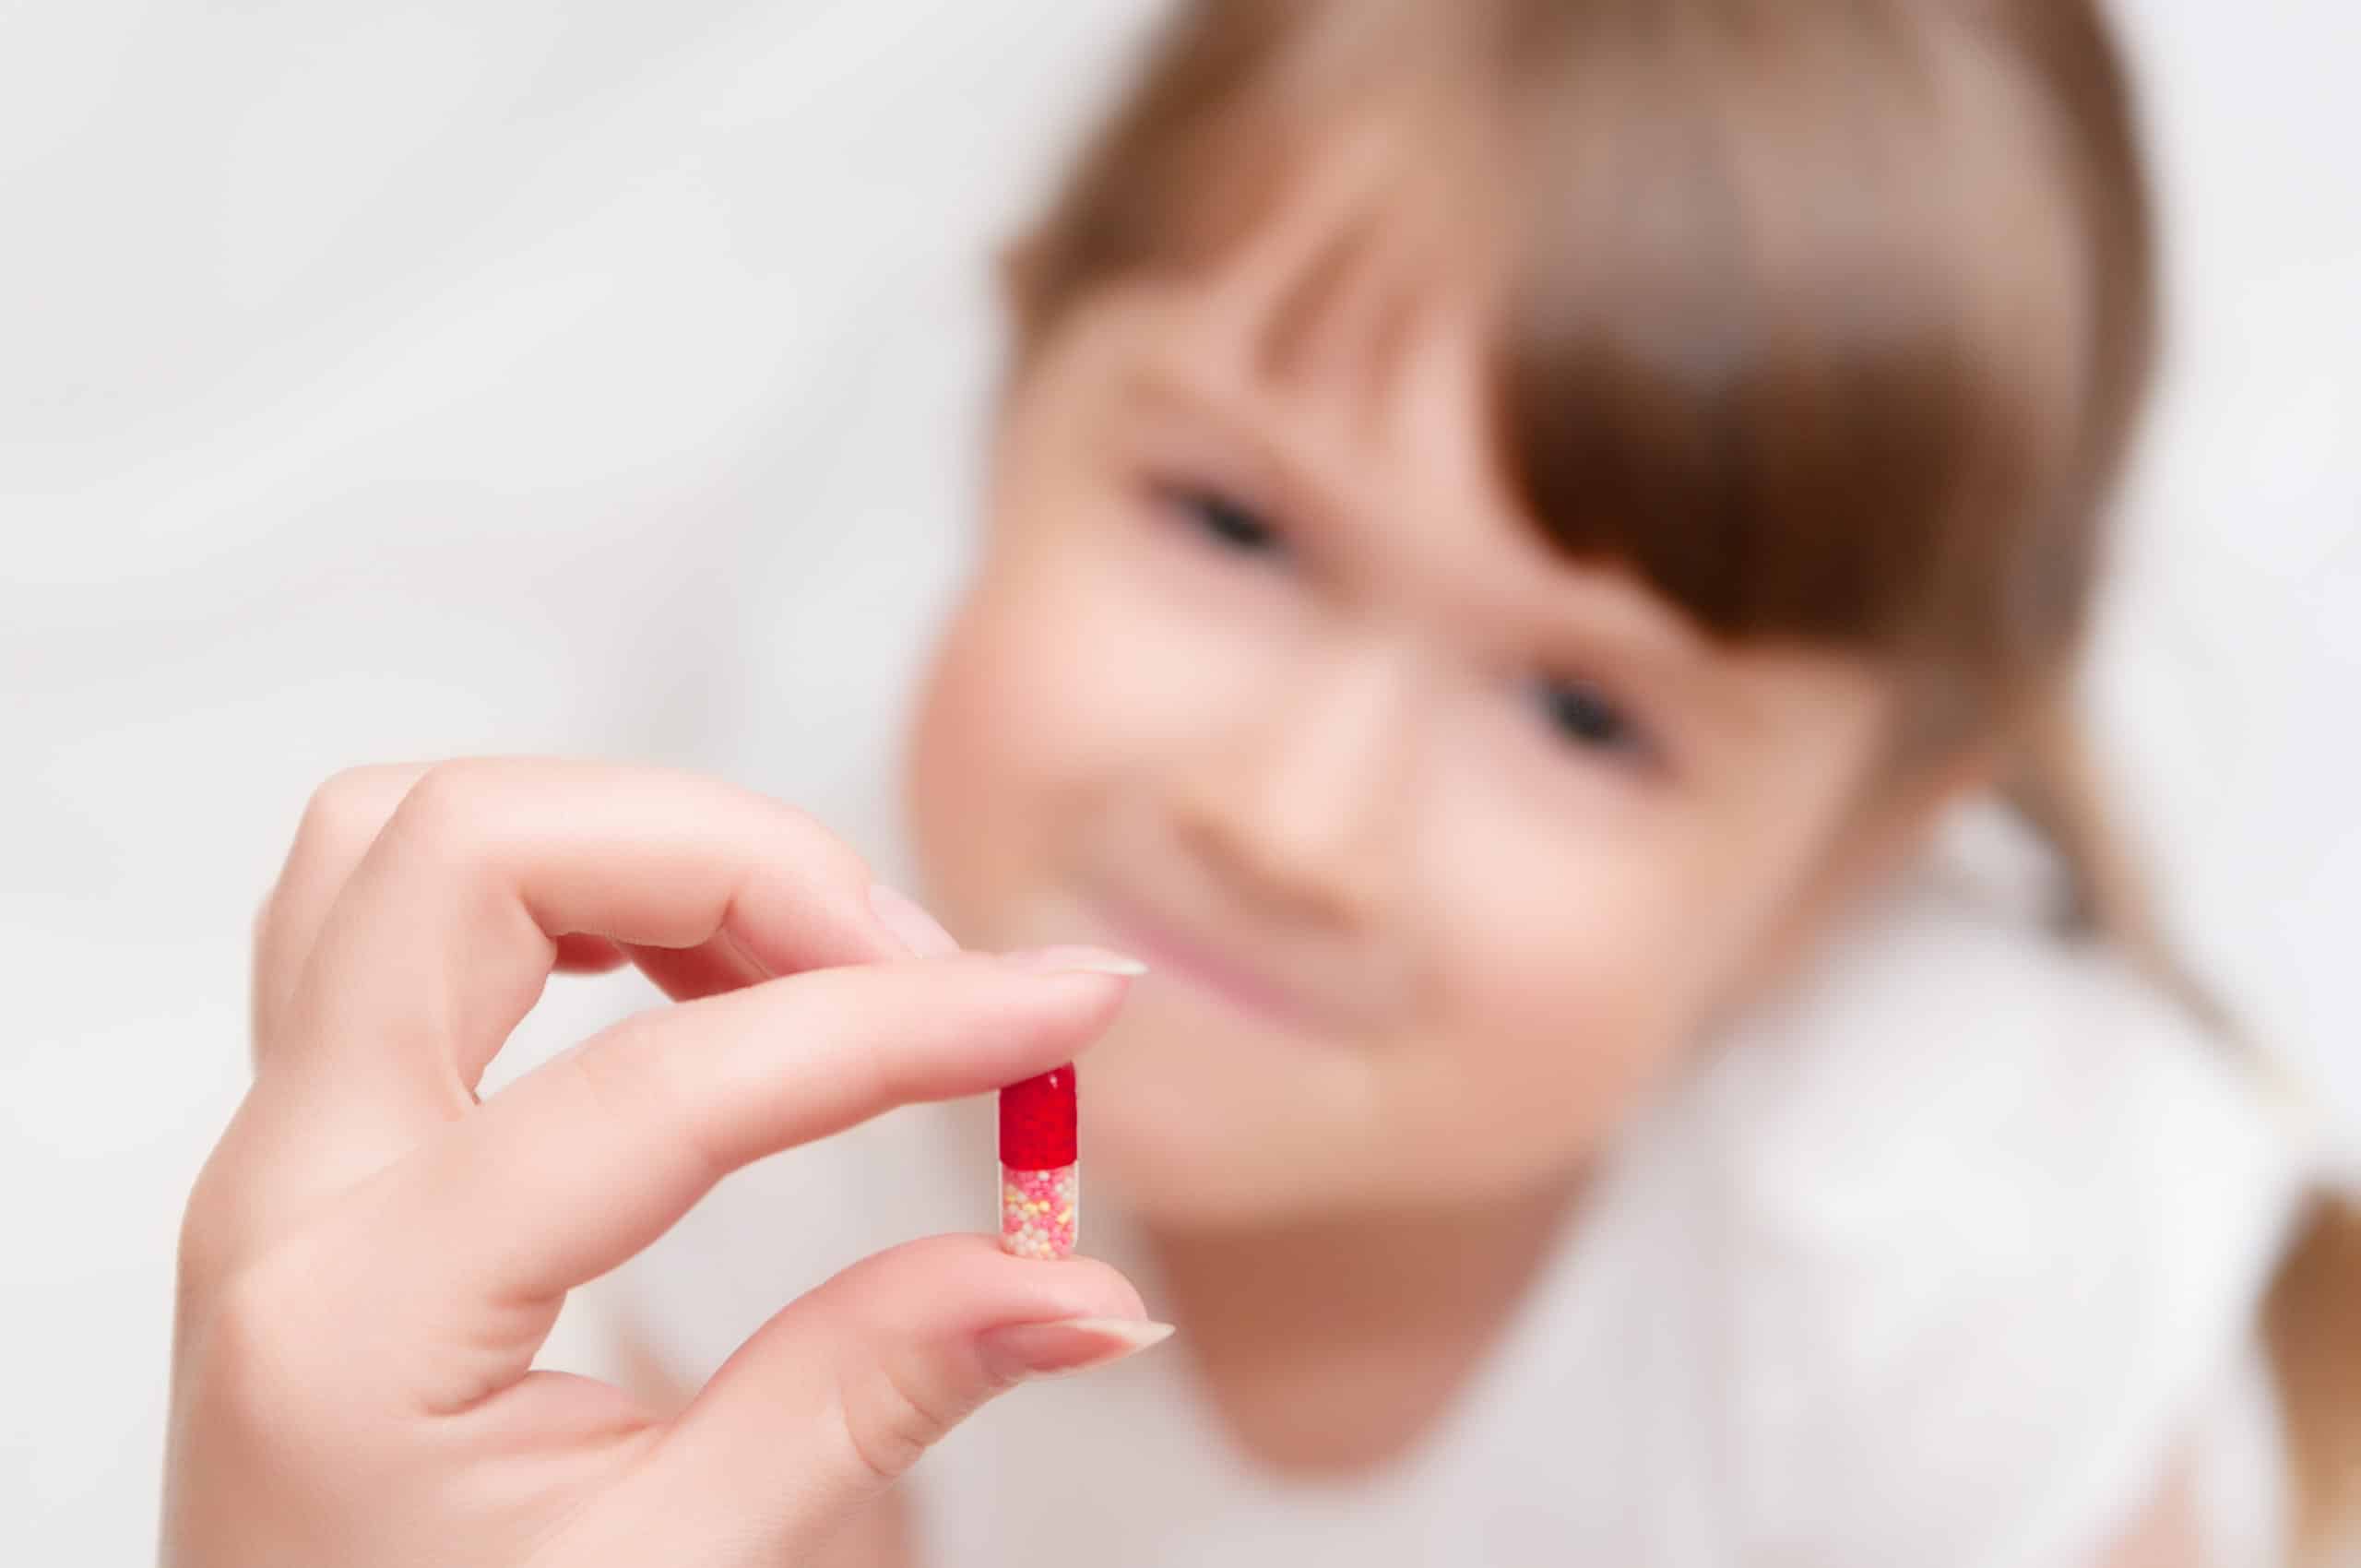 Teach your kids how to swallow a pill